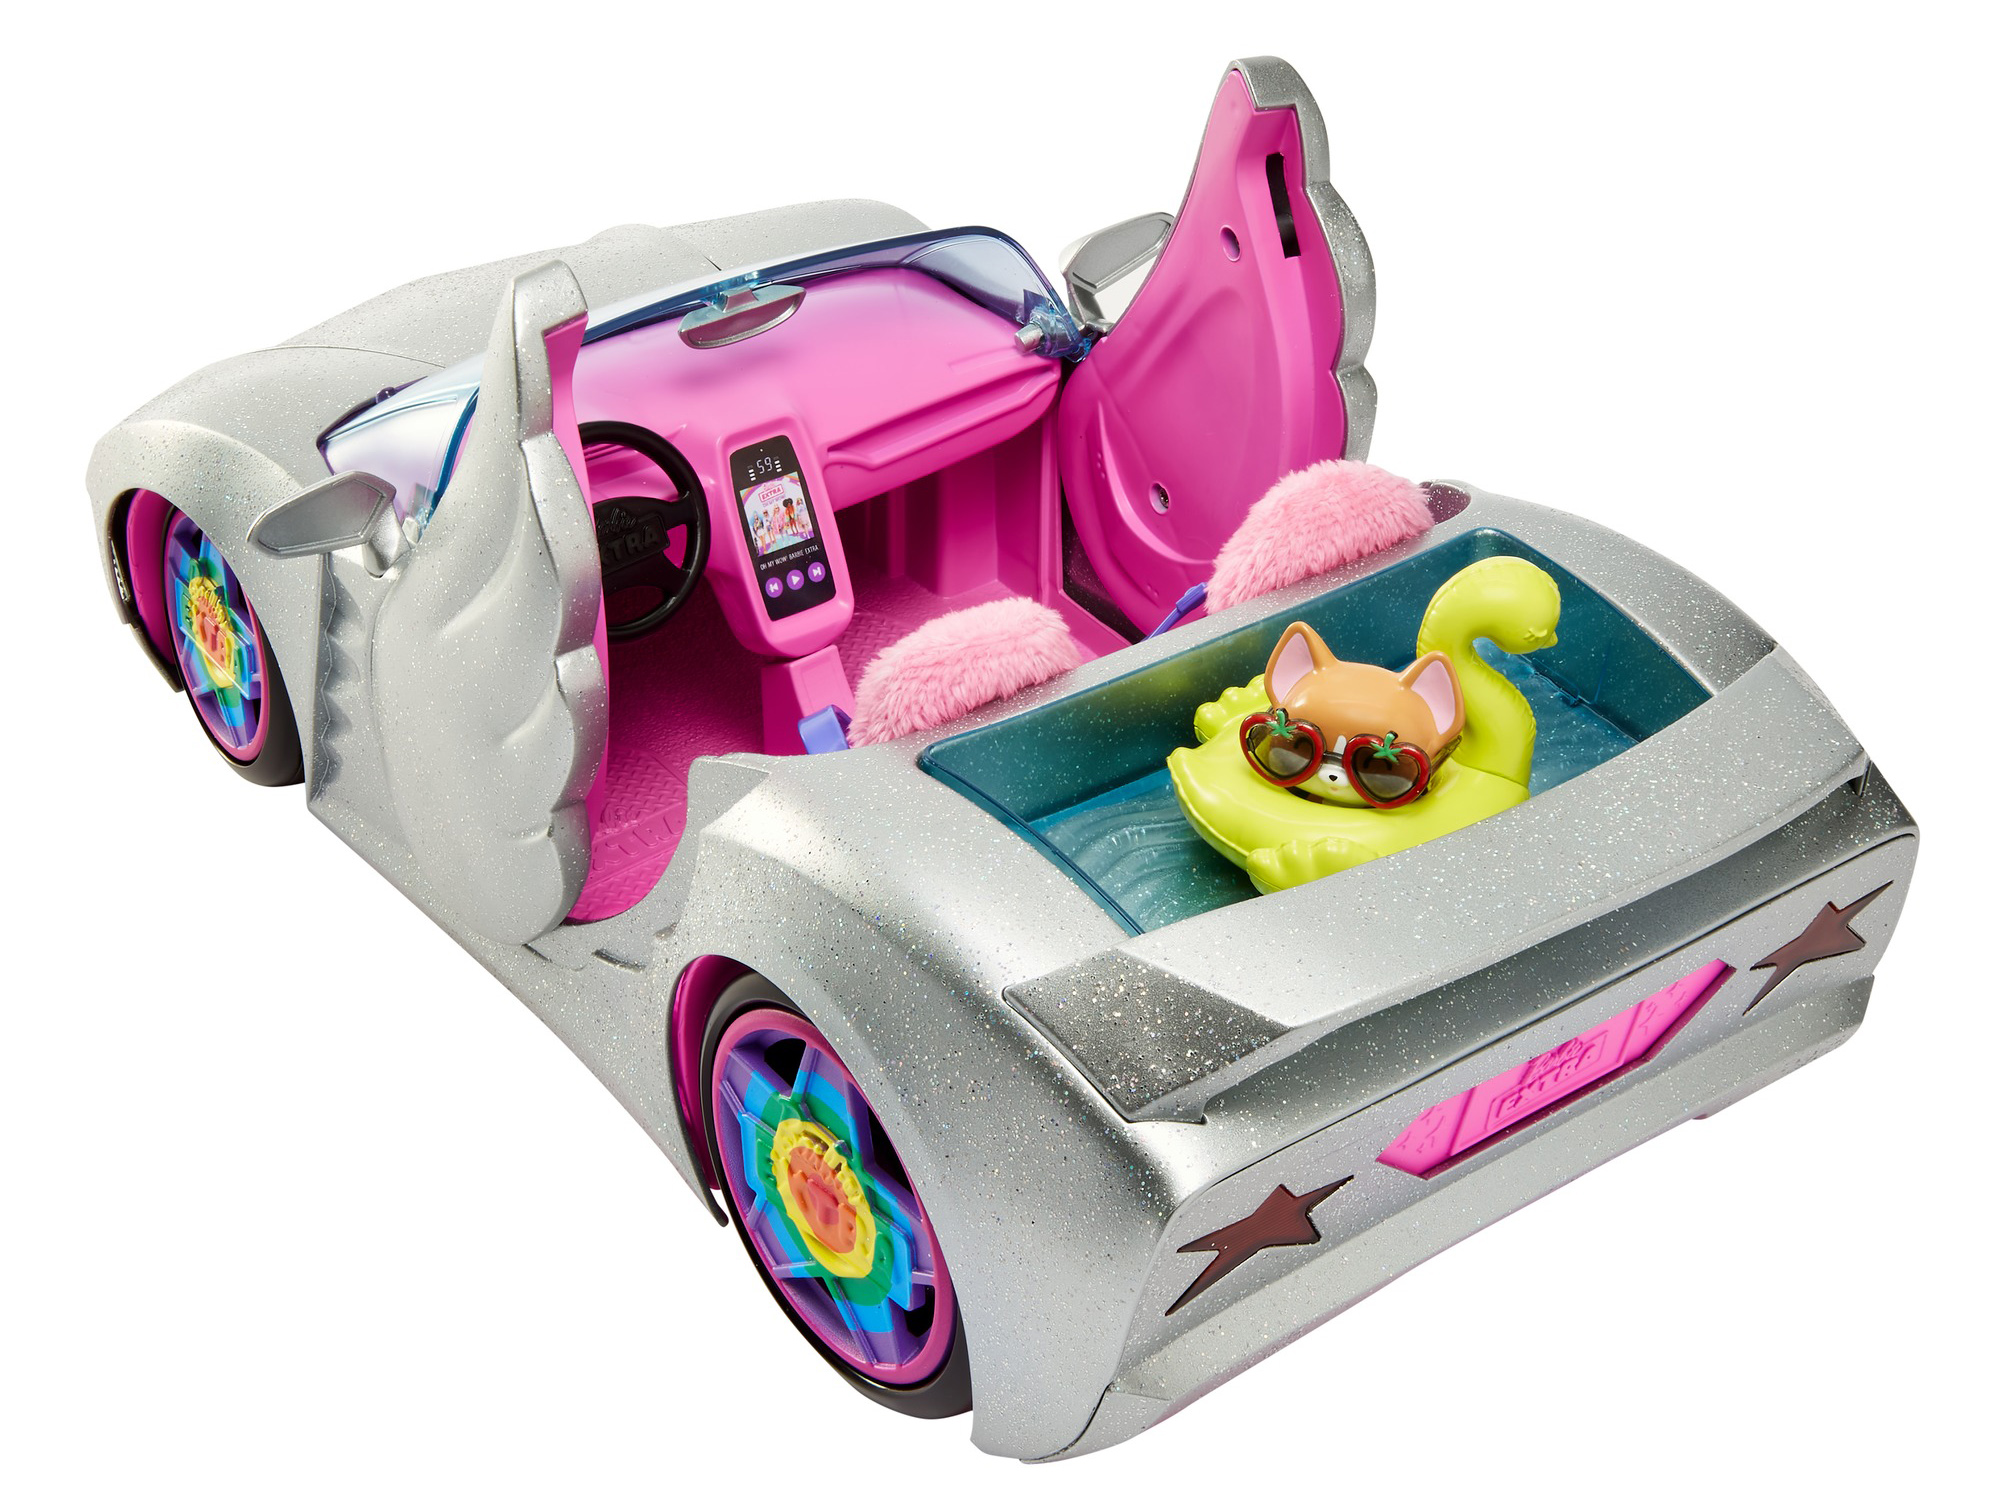 Greatest Four Seater Barbie Doll Car With Back Seats Learn more here ...